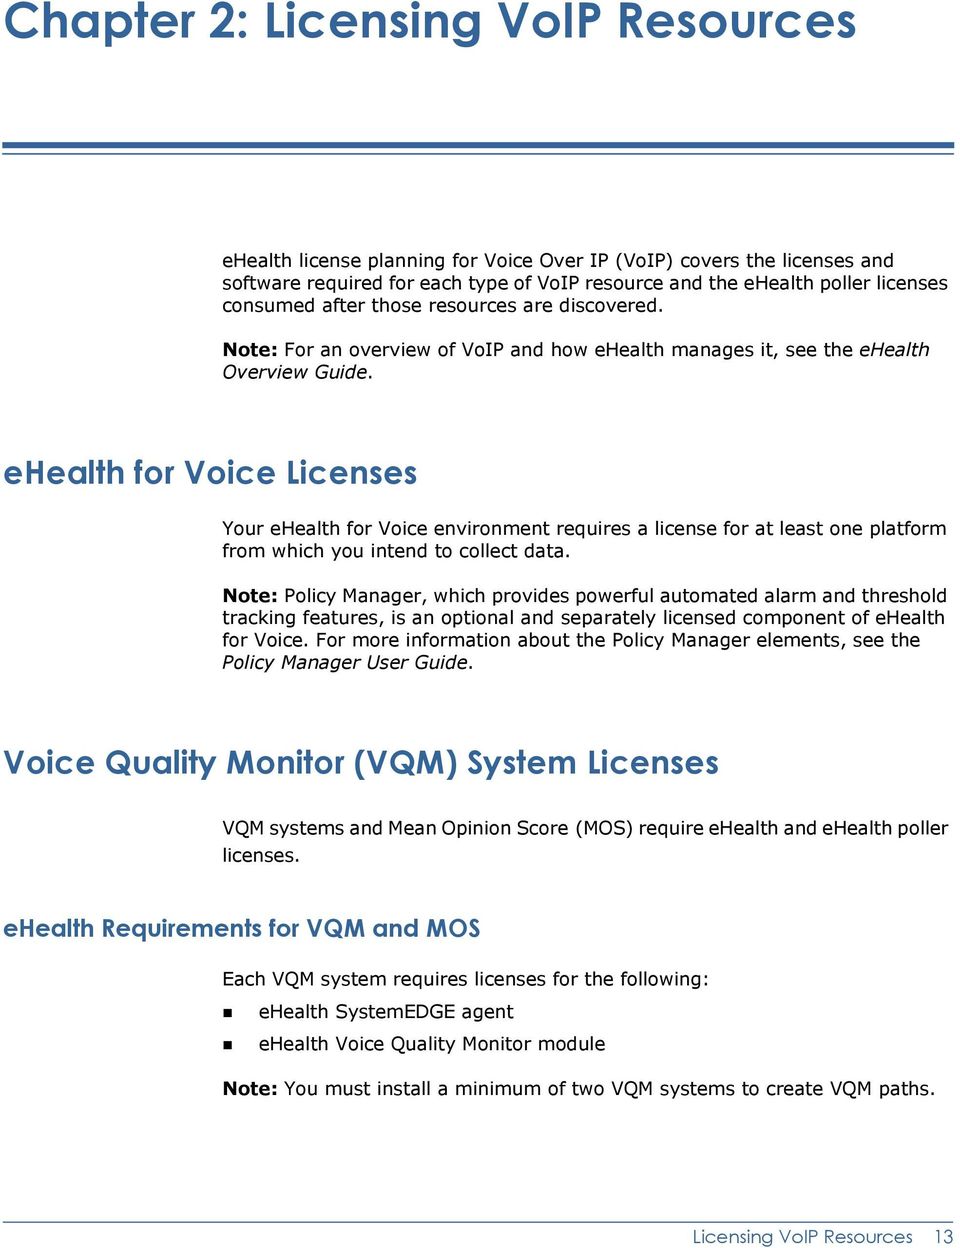 ehealth for Voice Licenses Your ehealth for Voice environment requires a license for at least one platform from which you intend to collect data.